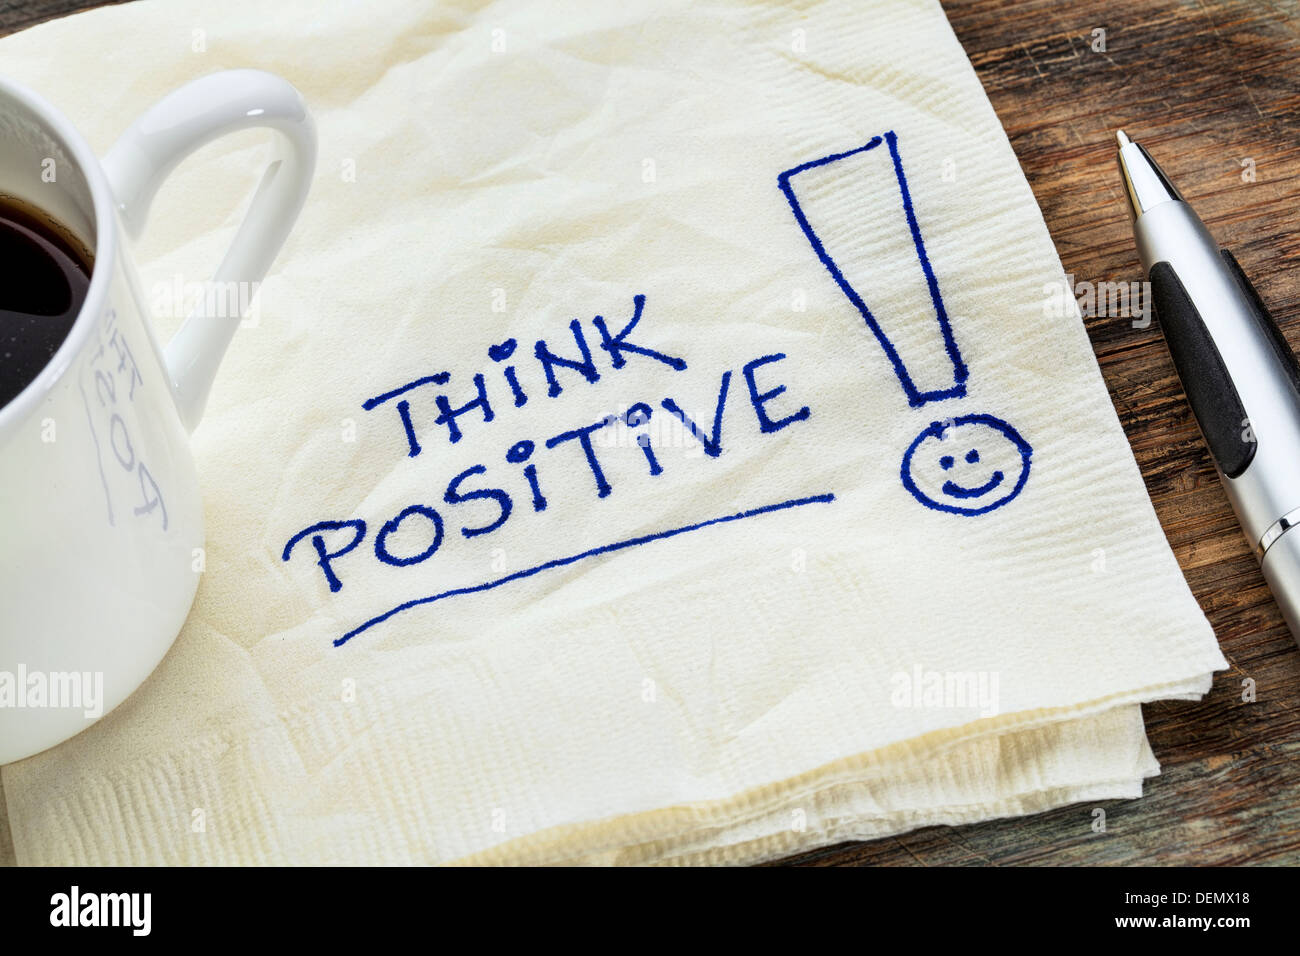 think positive - motivational slogan on a napkin with a cup of coffee Stock Photo